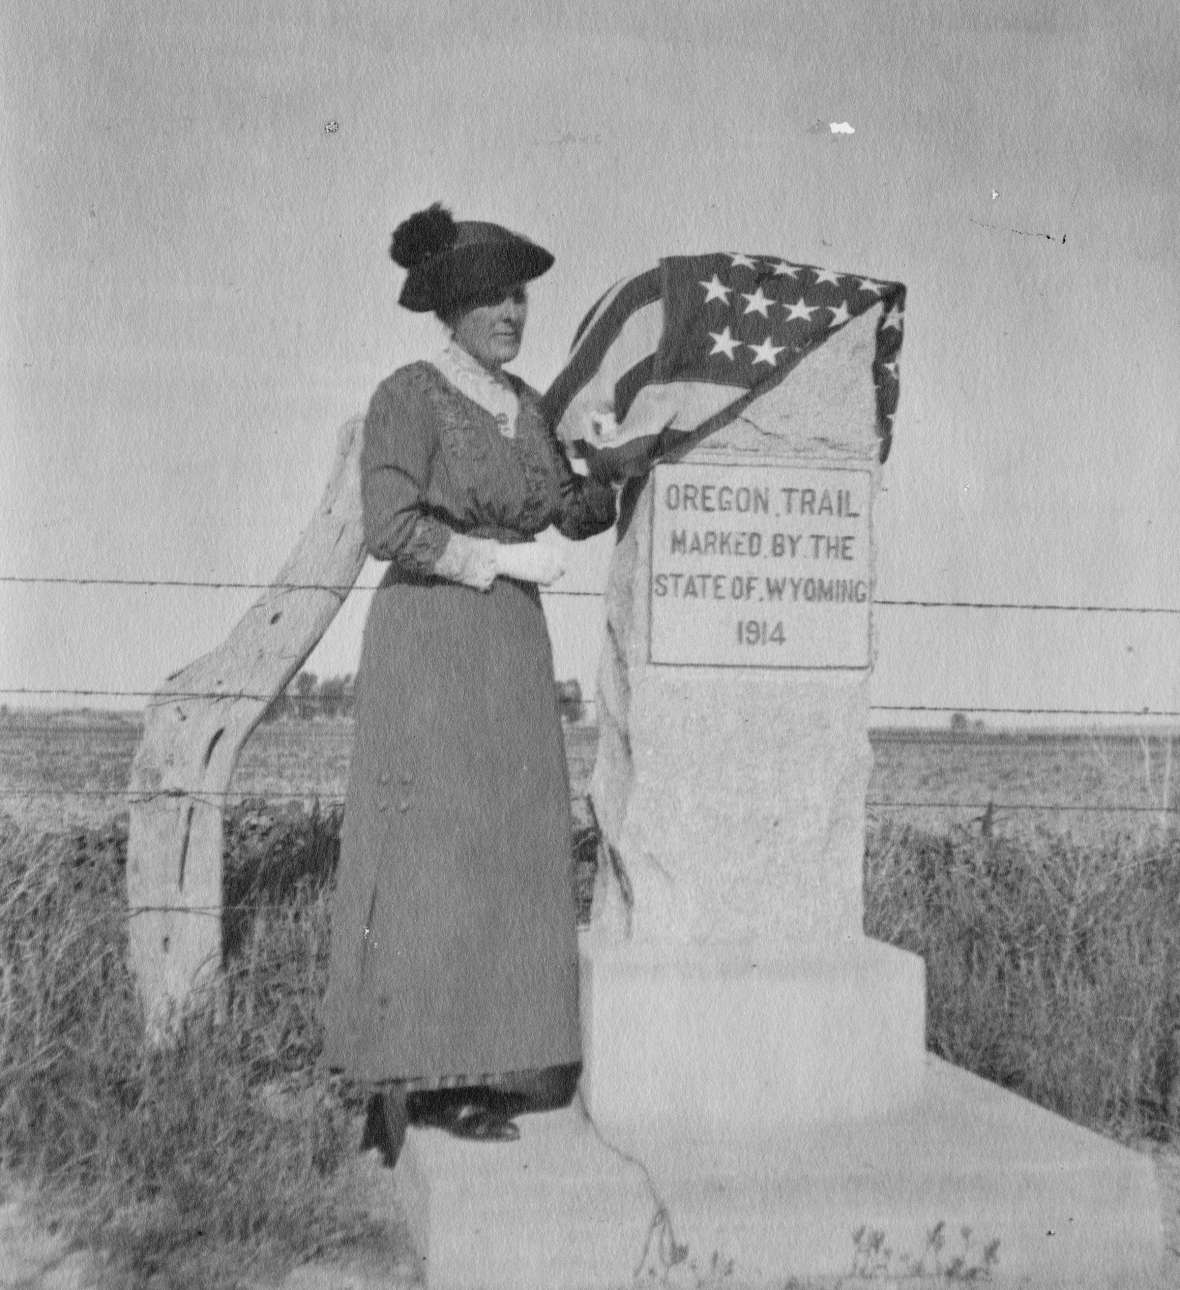 By 1911, Daughters of American Revolution chapters in Wyoming had begun marking historic trails. University of Wyoming professor and D.A.R. State Regent Grace Raymond Hebard lobbied heavily for a state-D.A.R partnership. In 1913 the legislature established a three-member Oregon Trail Commission with a budget of $2,500. Hebard joined the commission in 1914. Here she dedicates a marker on the trail just west of Torrington, Wyo., June 17, 1915. American Heritage Center.